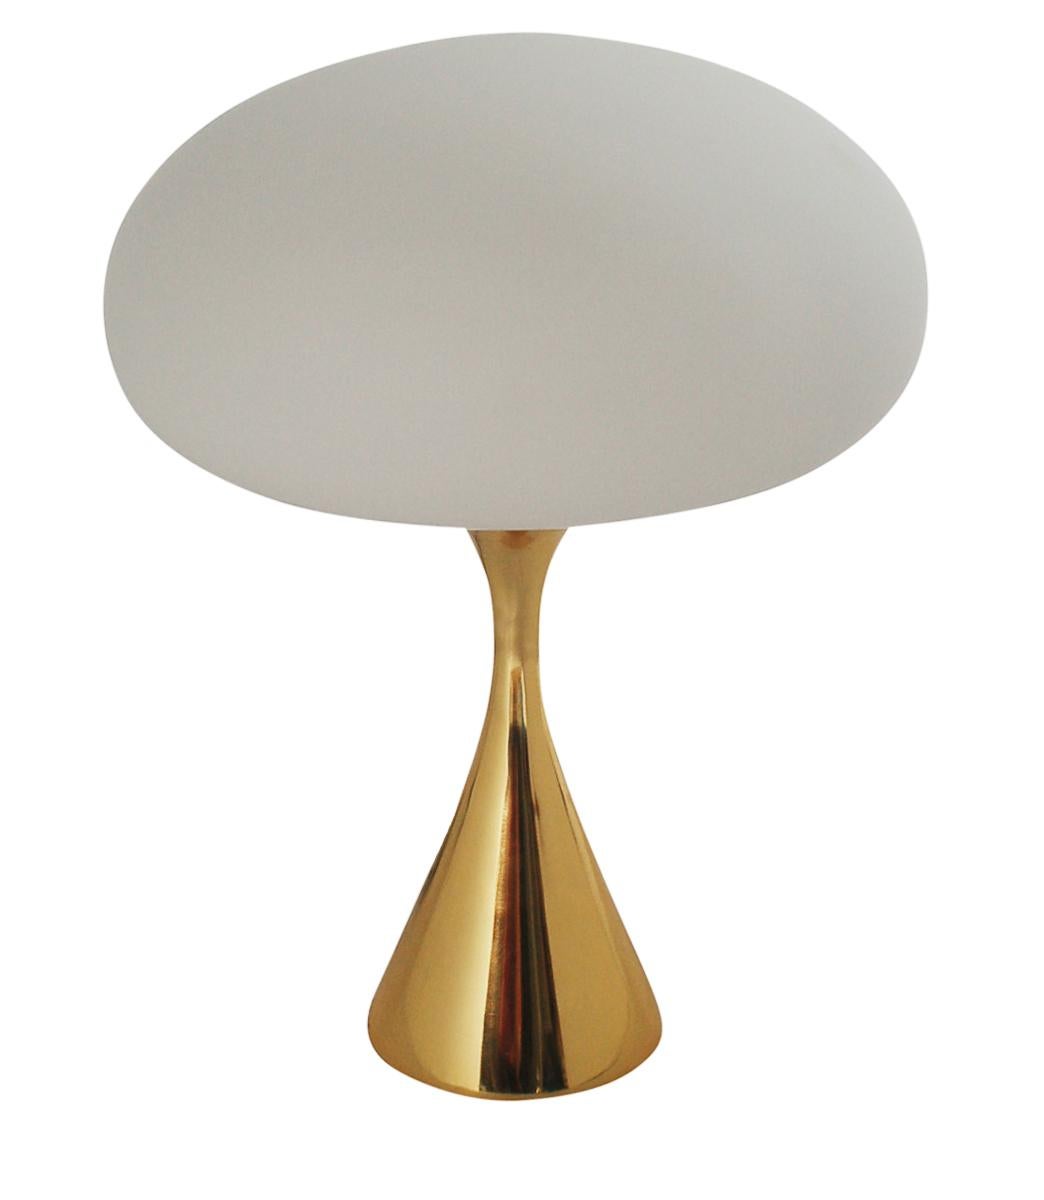 Pair of Mid-Century Modern Laurel Mushroom Table Lamps in Brass by Bill Curry 1